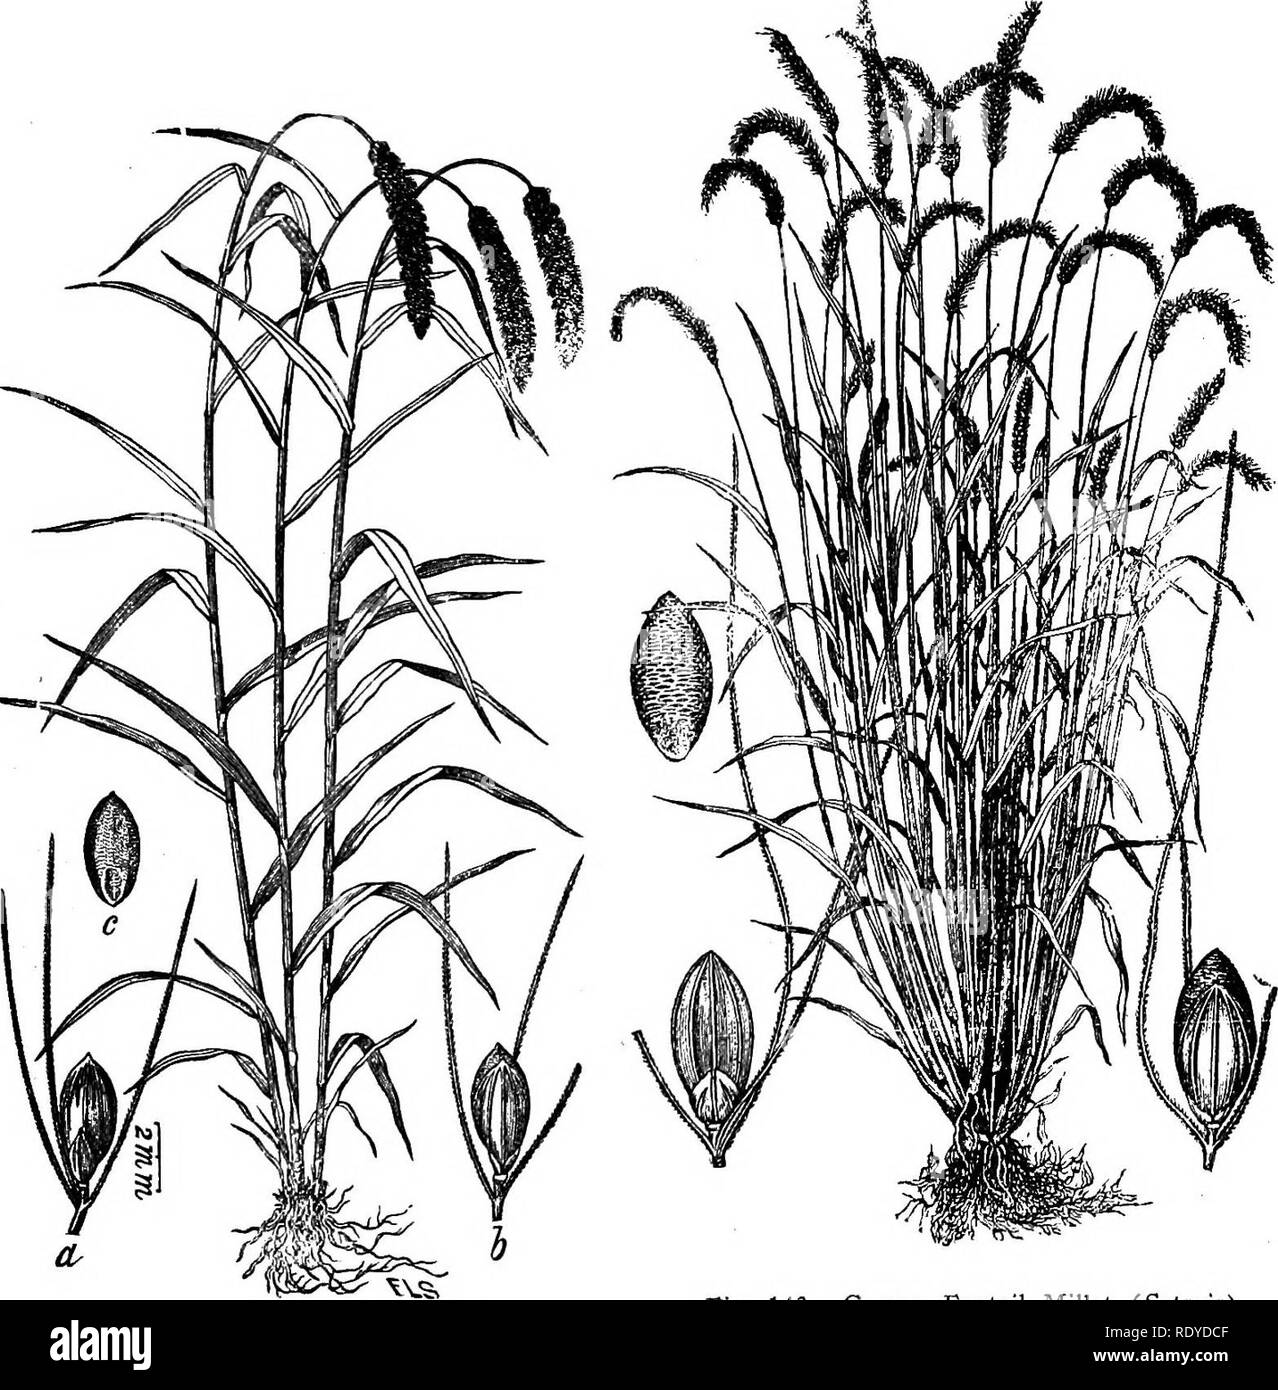 . A manual of poisonous plants, chiefly of eastern North America, with brief notes on economic and medicinal plants, and numerous illustrations. Poisonous plants. SPERMATOPHYTA—GRAMINEAE—GRASSES 349 3. Paspalum, L. Paspalum Spikelets spiked or sometimes racemed, in 2 to 4 rows on one side of the flattened or filiform rachis, awnless, 1-flowered; glumes 3, rarely only 2, 1 glume flowering; flower coriaceous, orbicular or ovate; stamens 3; spikes 1 or more at or toward the summit of an elongated peduncle. Species about 160, chiefly in warm temperate regions in both hemispheres. In South America  Stock Photo